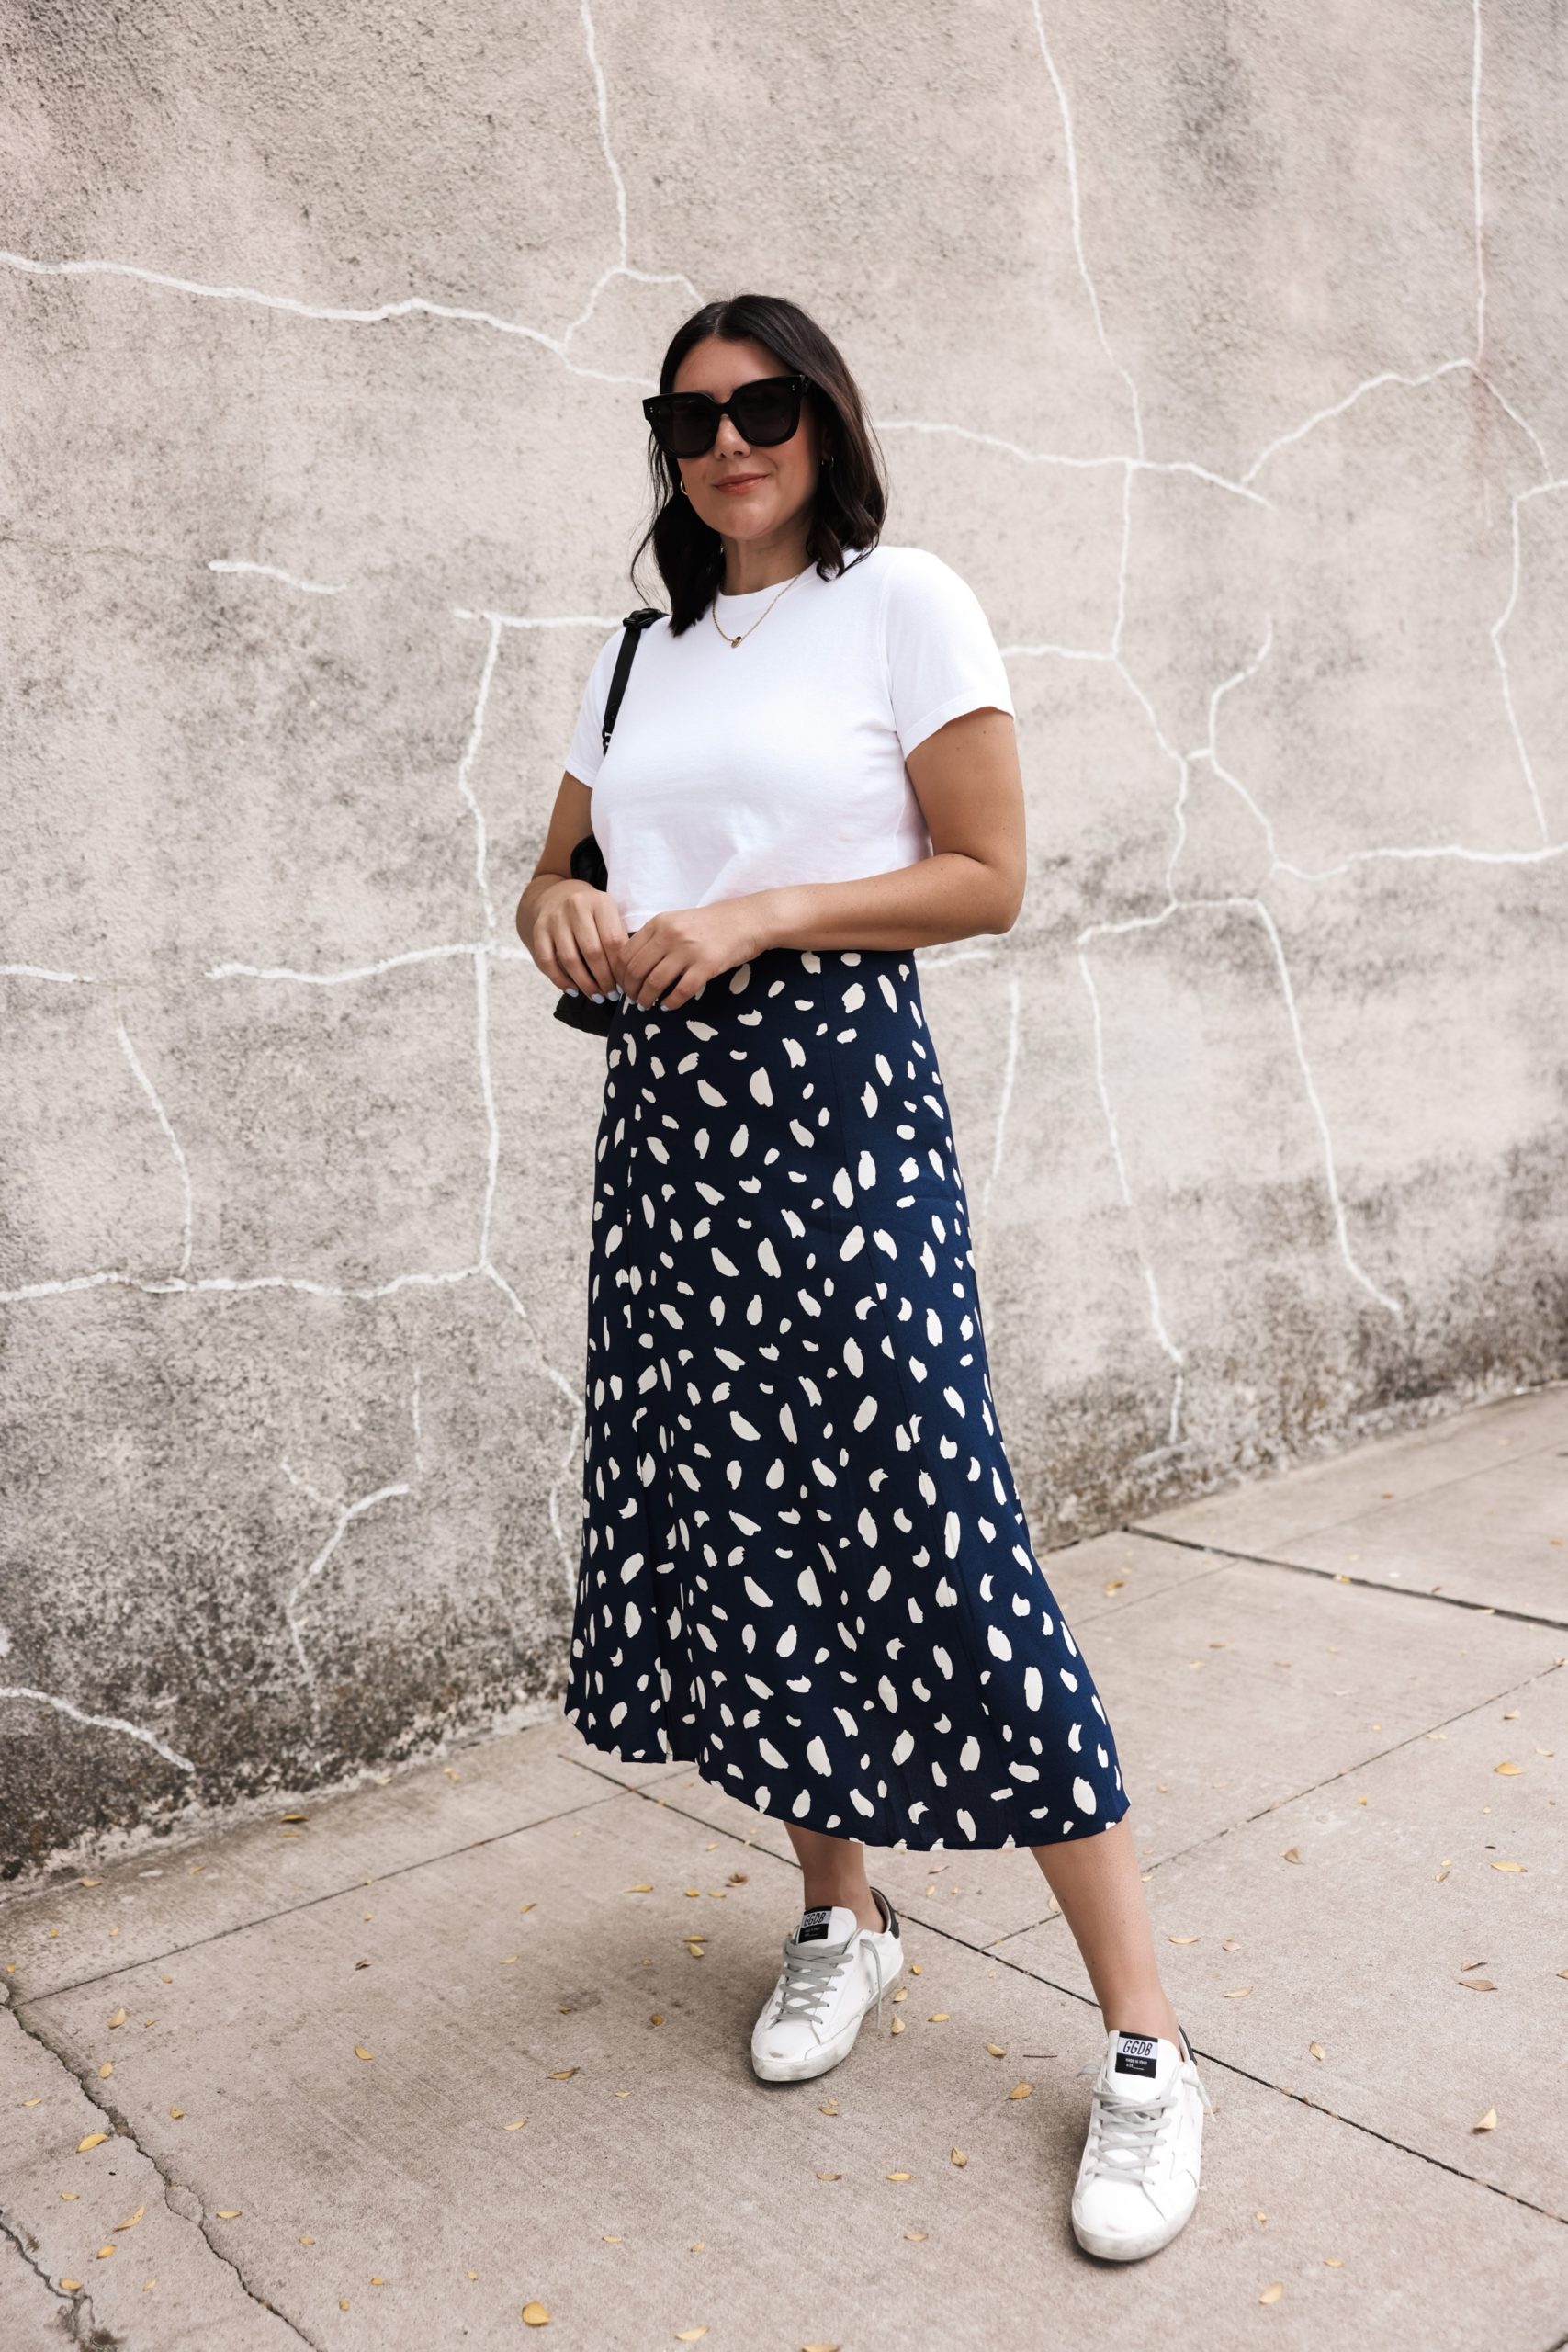 Easy Peasy: The Skirt and Tee | kendi everyday